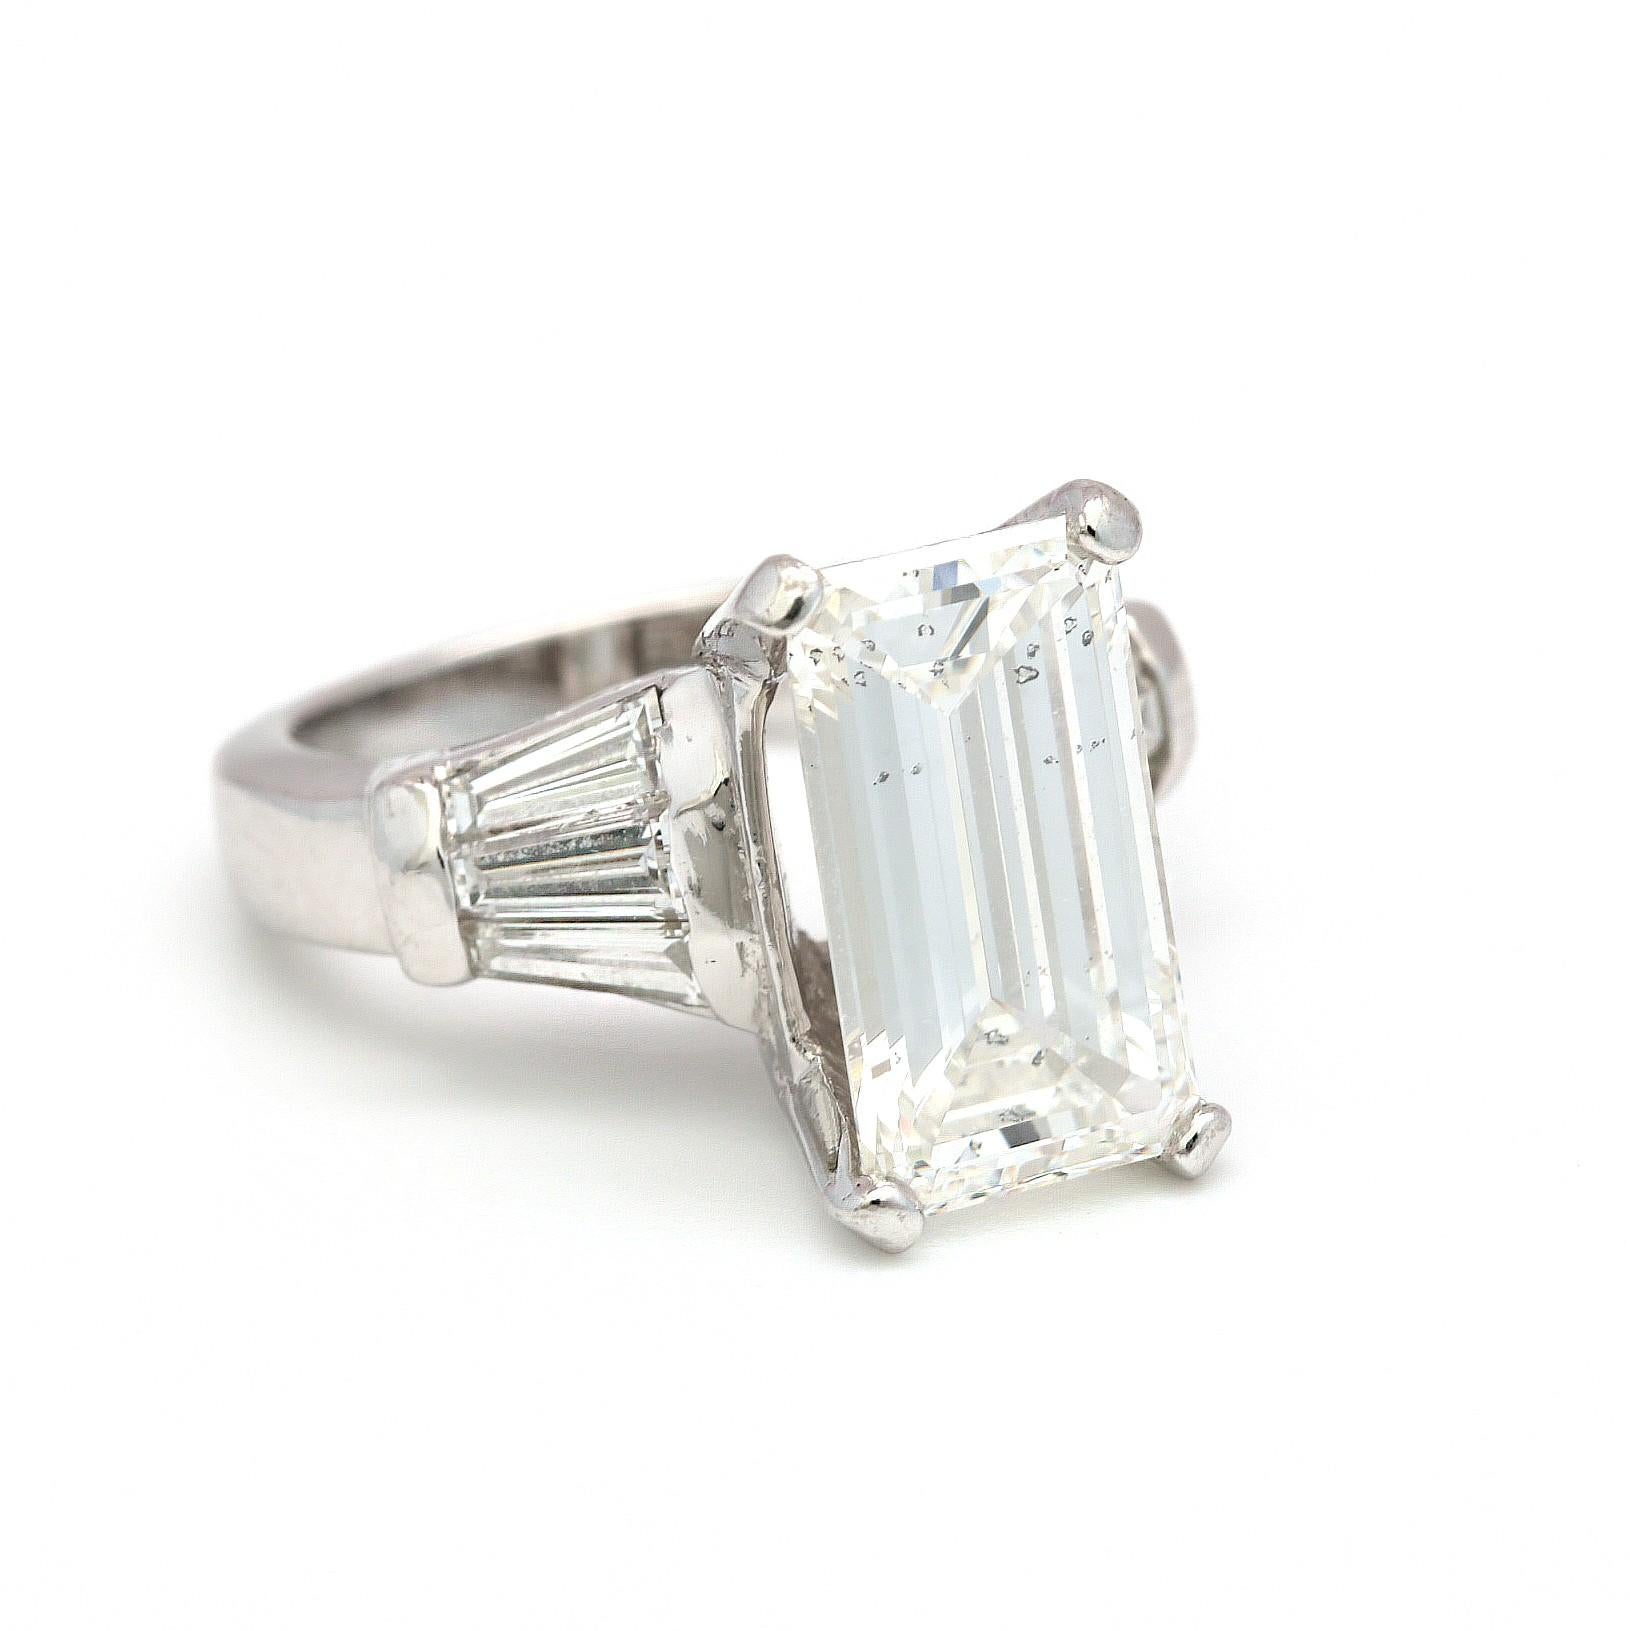 A beautiful Emerald Cut Diamond ring. 
Center Emerald cut diamond is GIA Report at a 5.02 carats H SI2ct (GIA Report # 5161725200). 
Side diamonds are approximately 1 carat with same quality but not certified, giving this ring a total carat weight